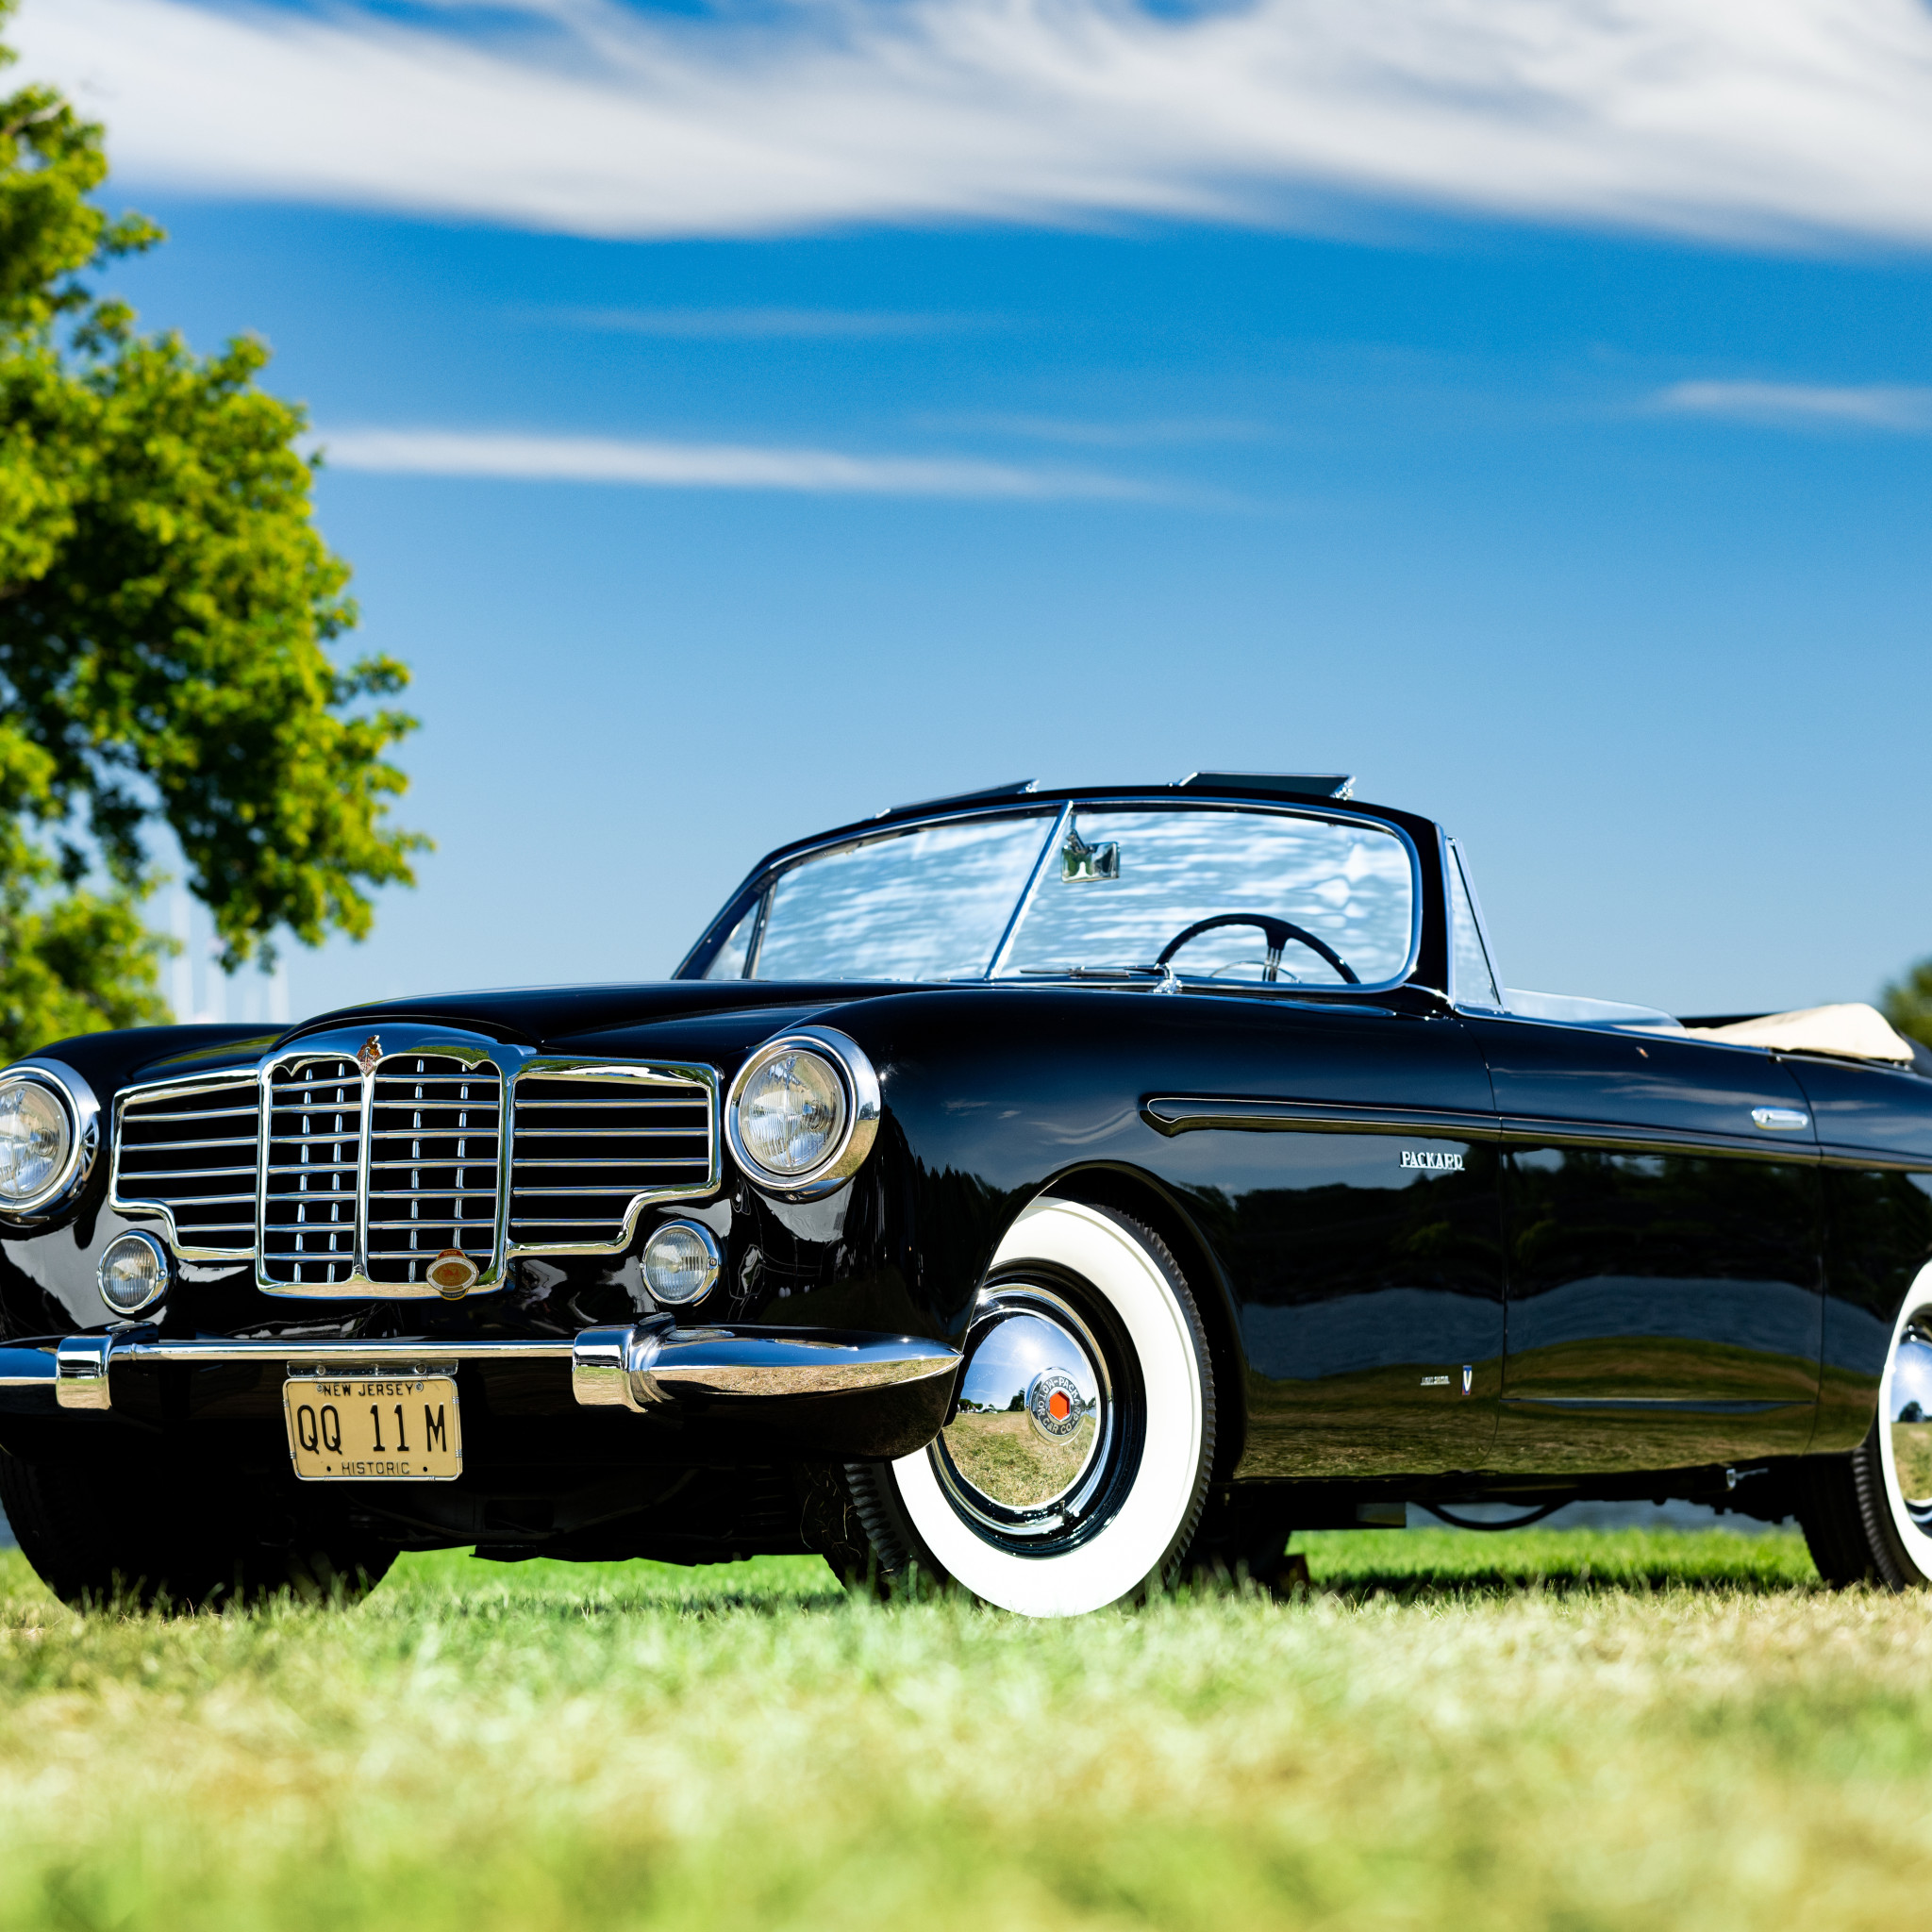 Two days, two exceptional Concours experiences